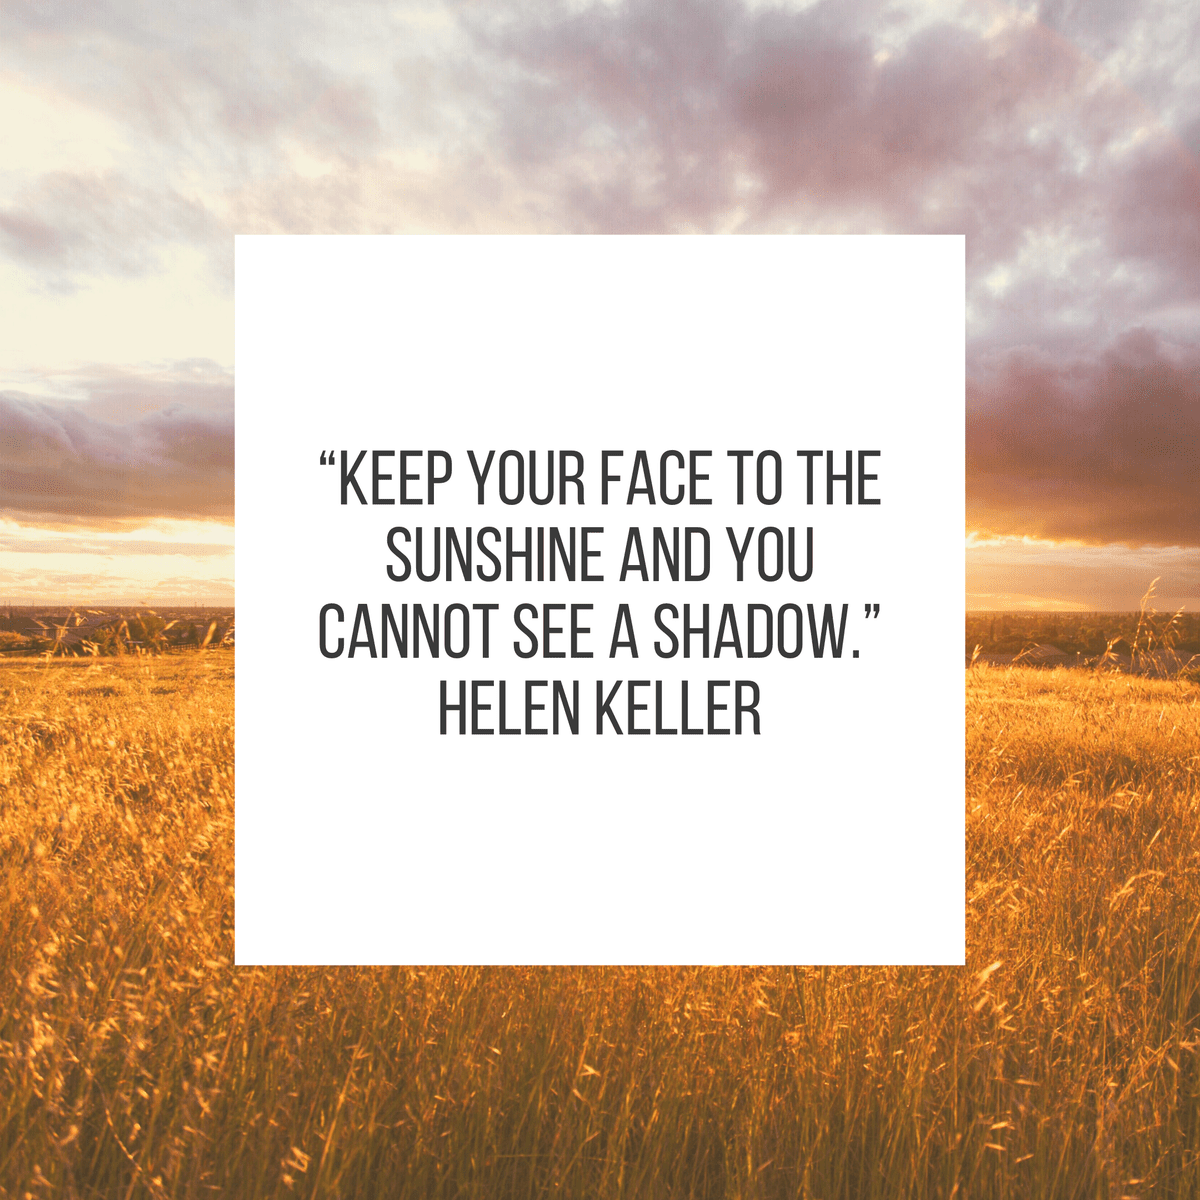 “Keep your face to the sunshine and you cannot see a shadow.” Helen Keller